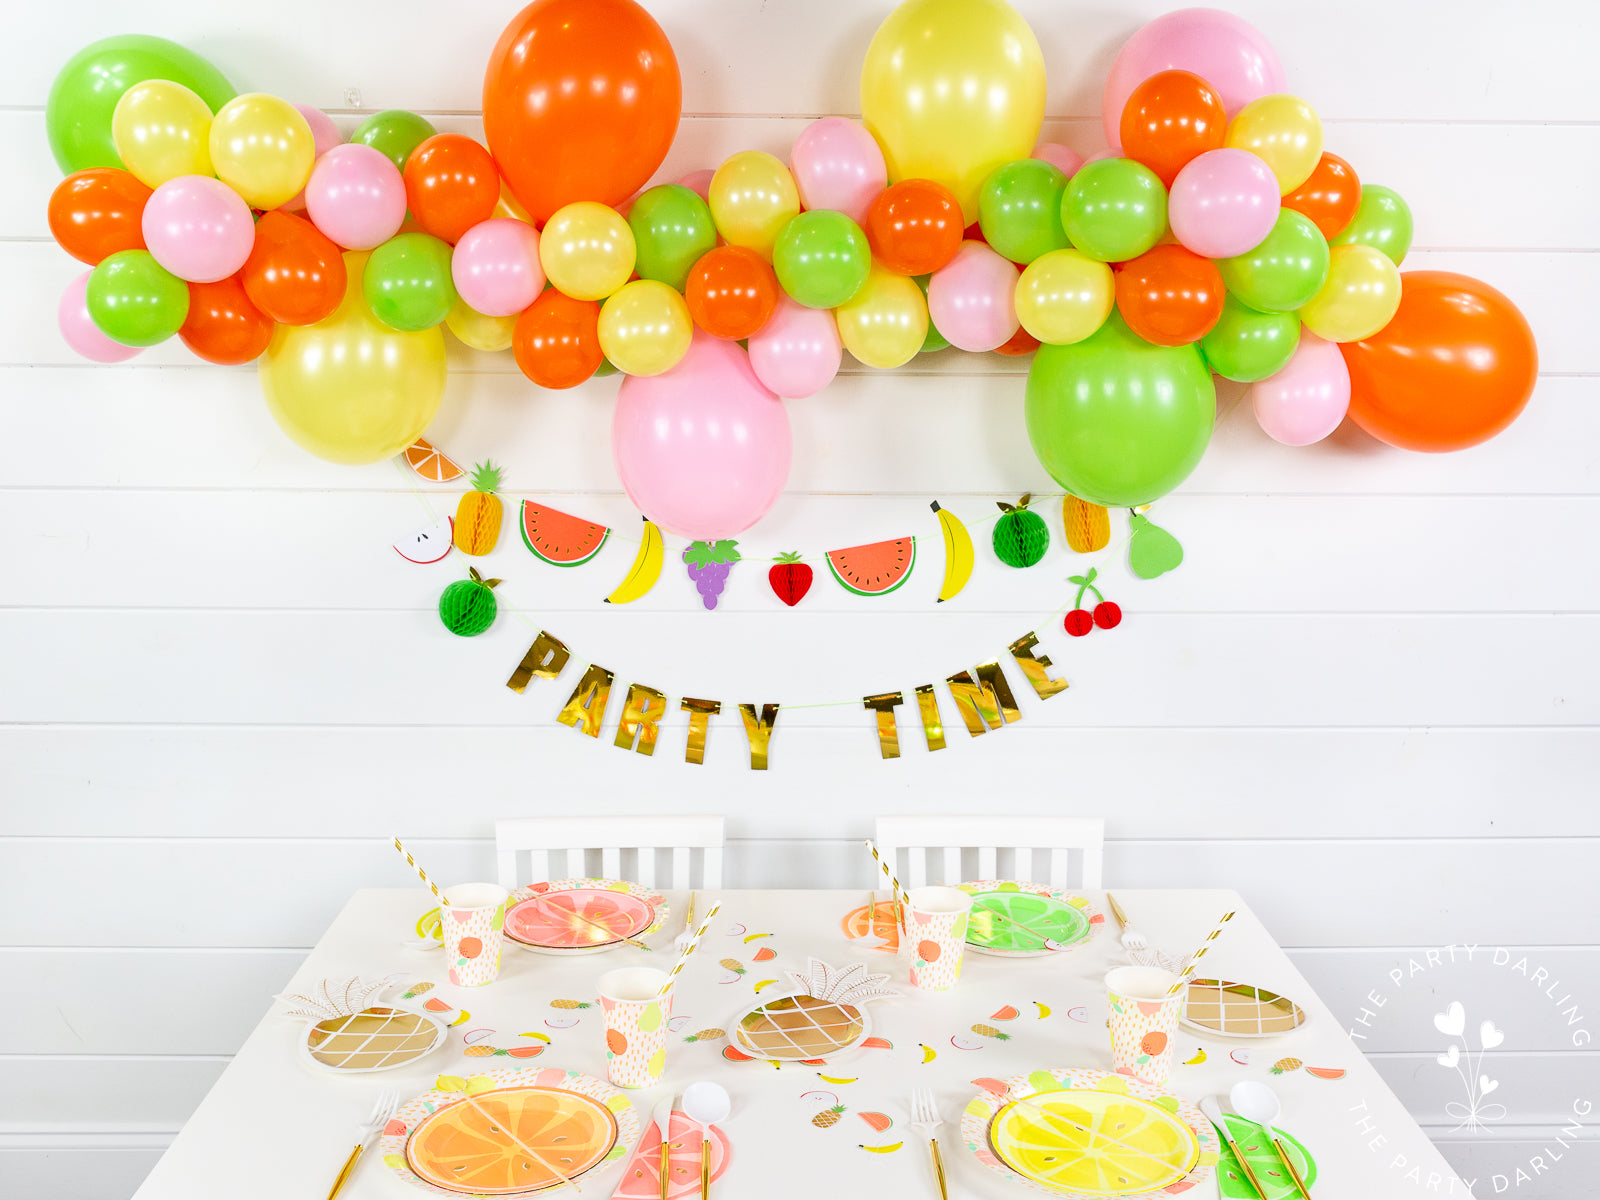 Tutti Frutti Baby Shower Ideas & Inspiration // Hostess with the